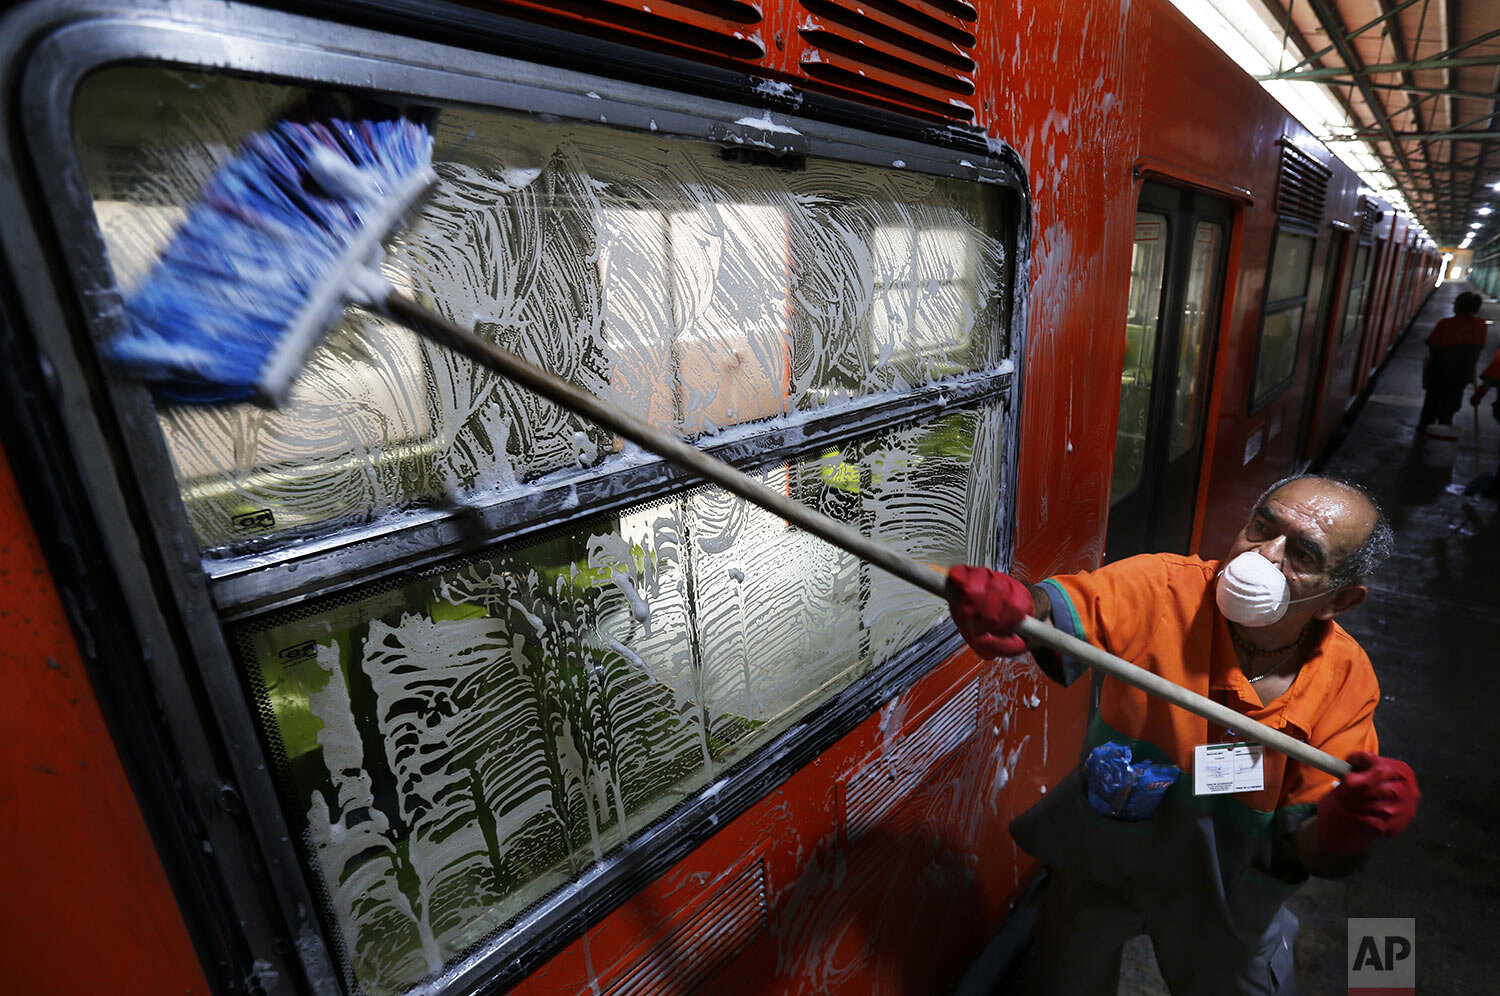  A man washes metro car as a preventive measure against the spread of the new coronavirus in Mexico City, March 18, 2020. (AP Photo/Marco Ugarte) 